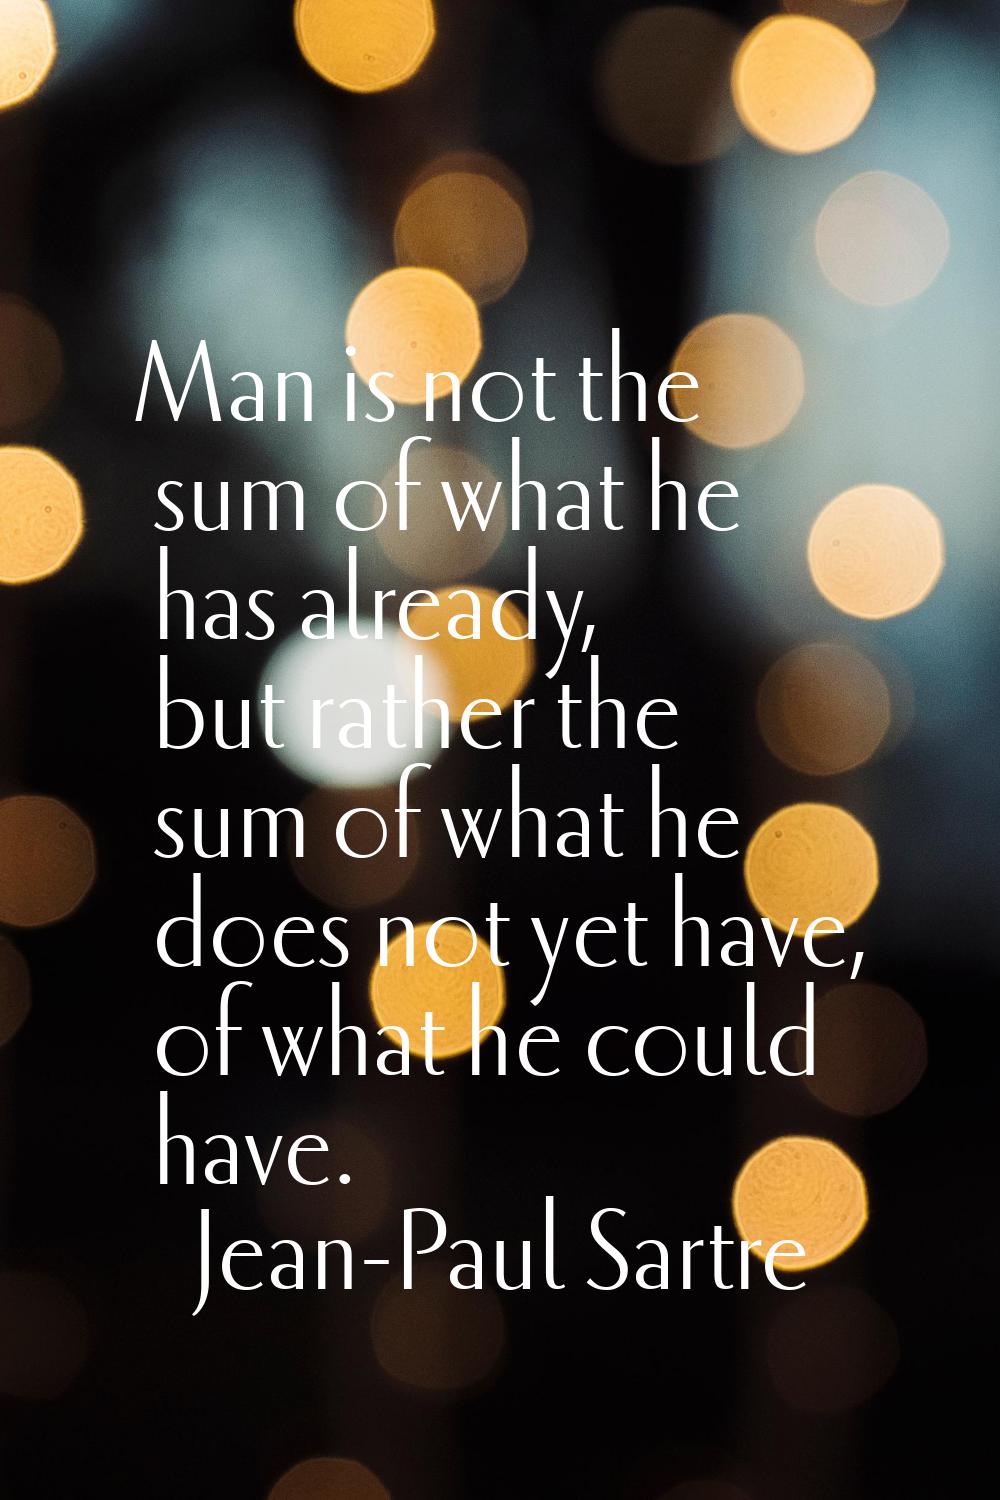 Man is not the sum of what he has already, but rather the sum of what he does not yet have, of what